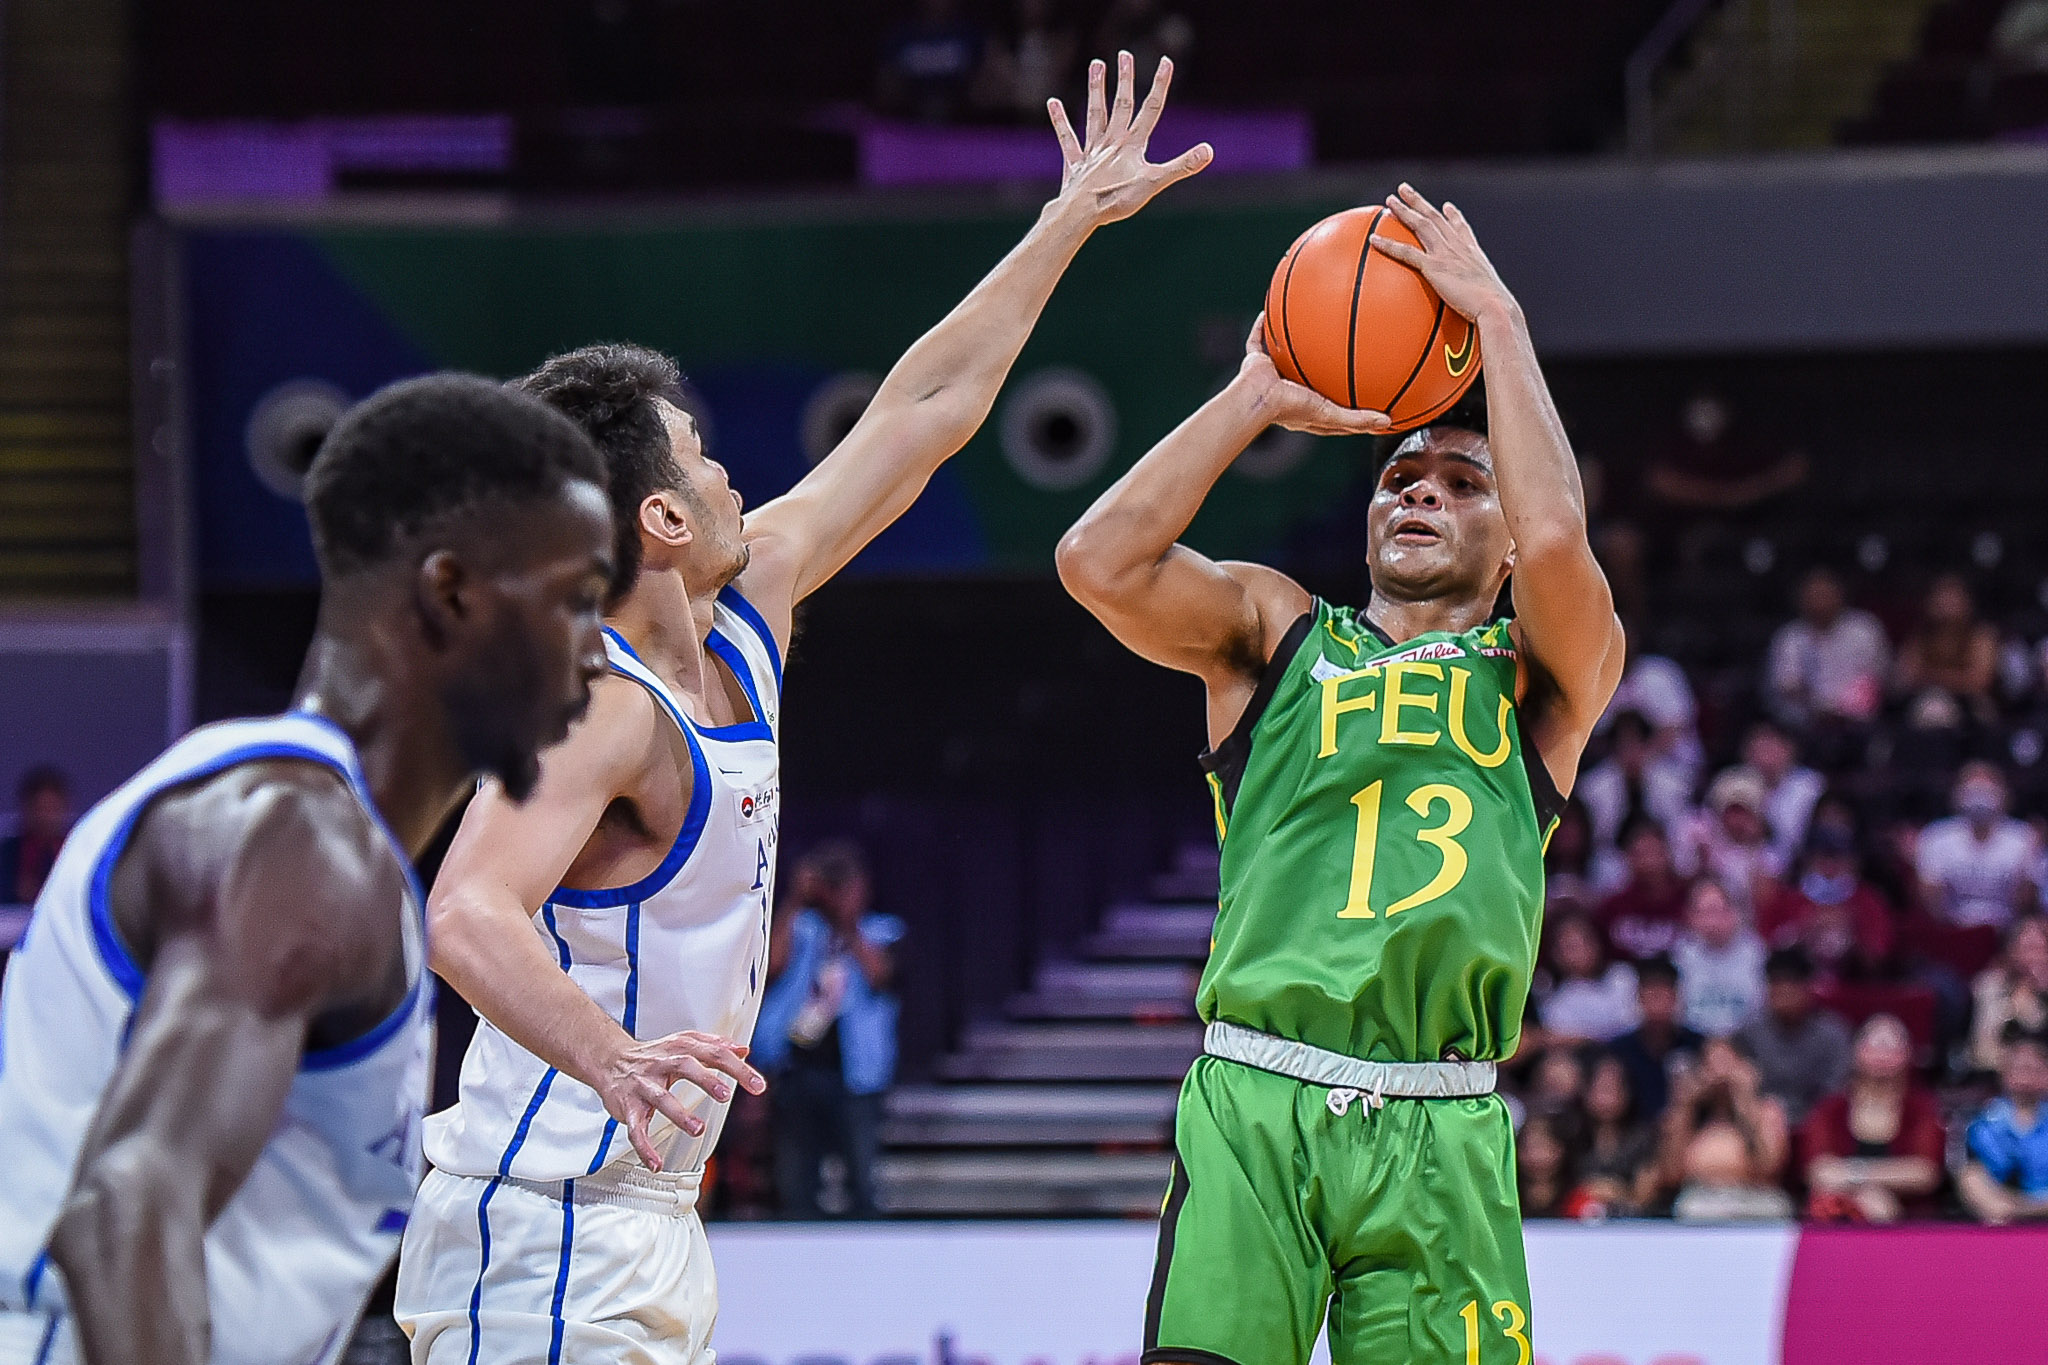 FEU outlasts Ateneo in OT thriller for first win